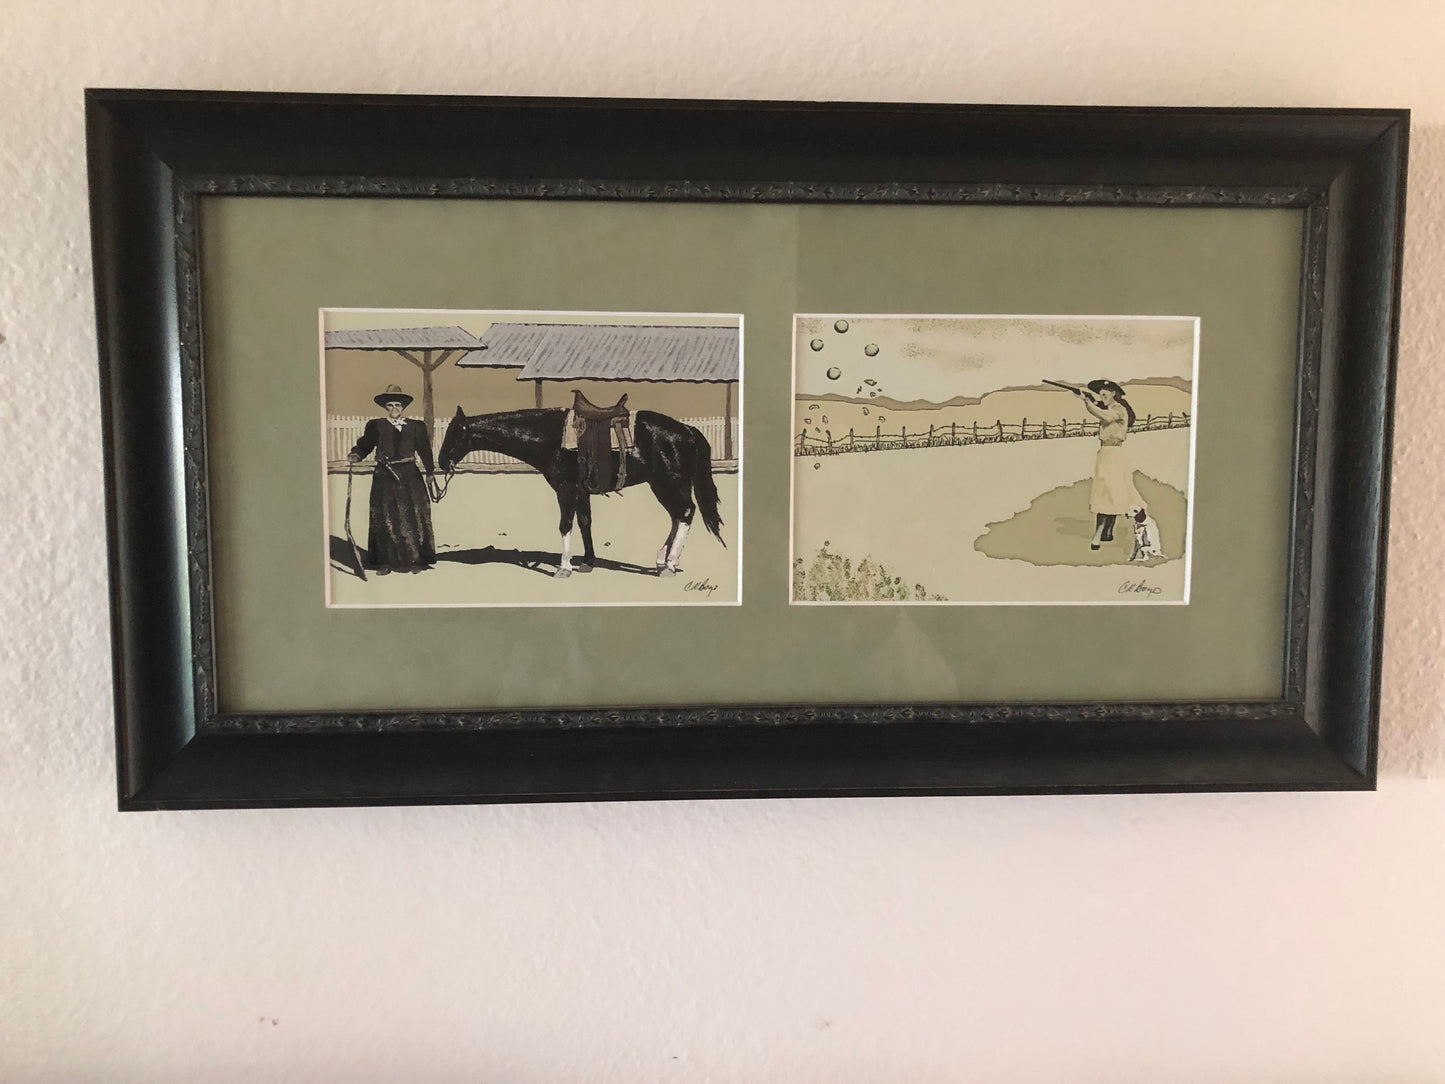 Annie Oakley and Calamity Jane - Framed Diptych